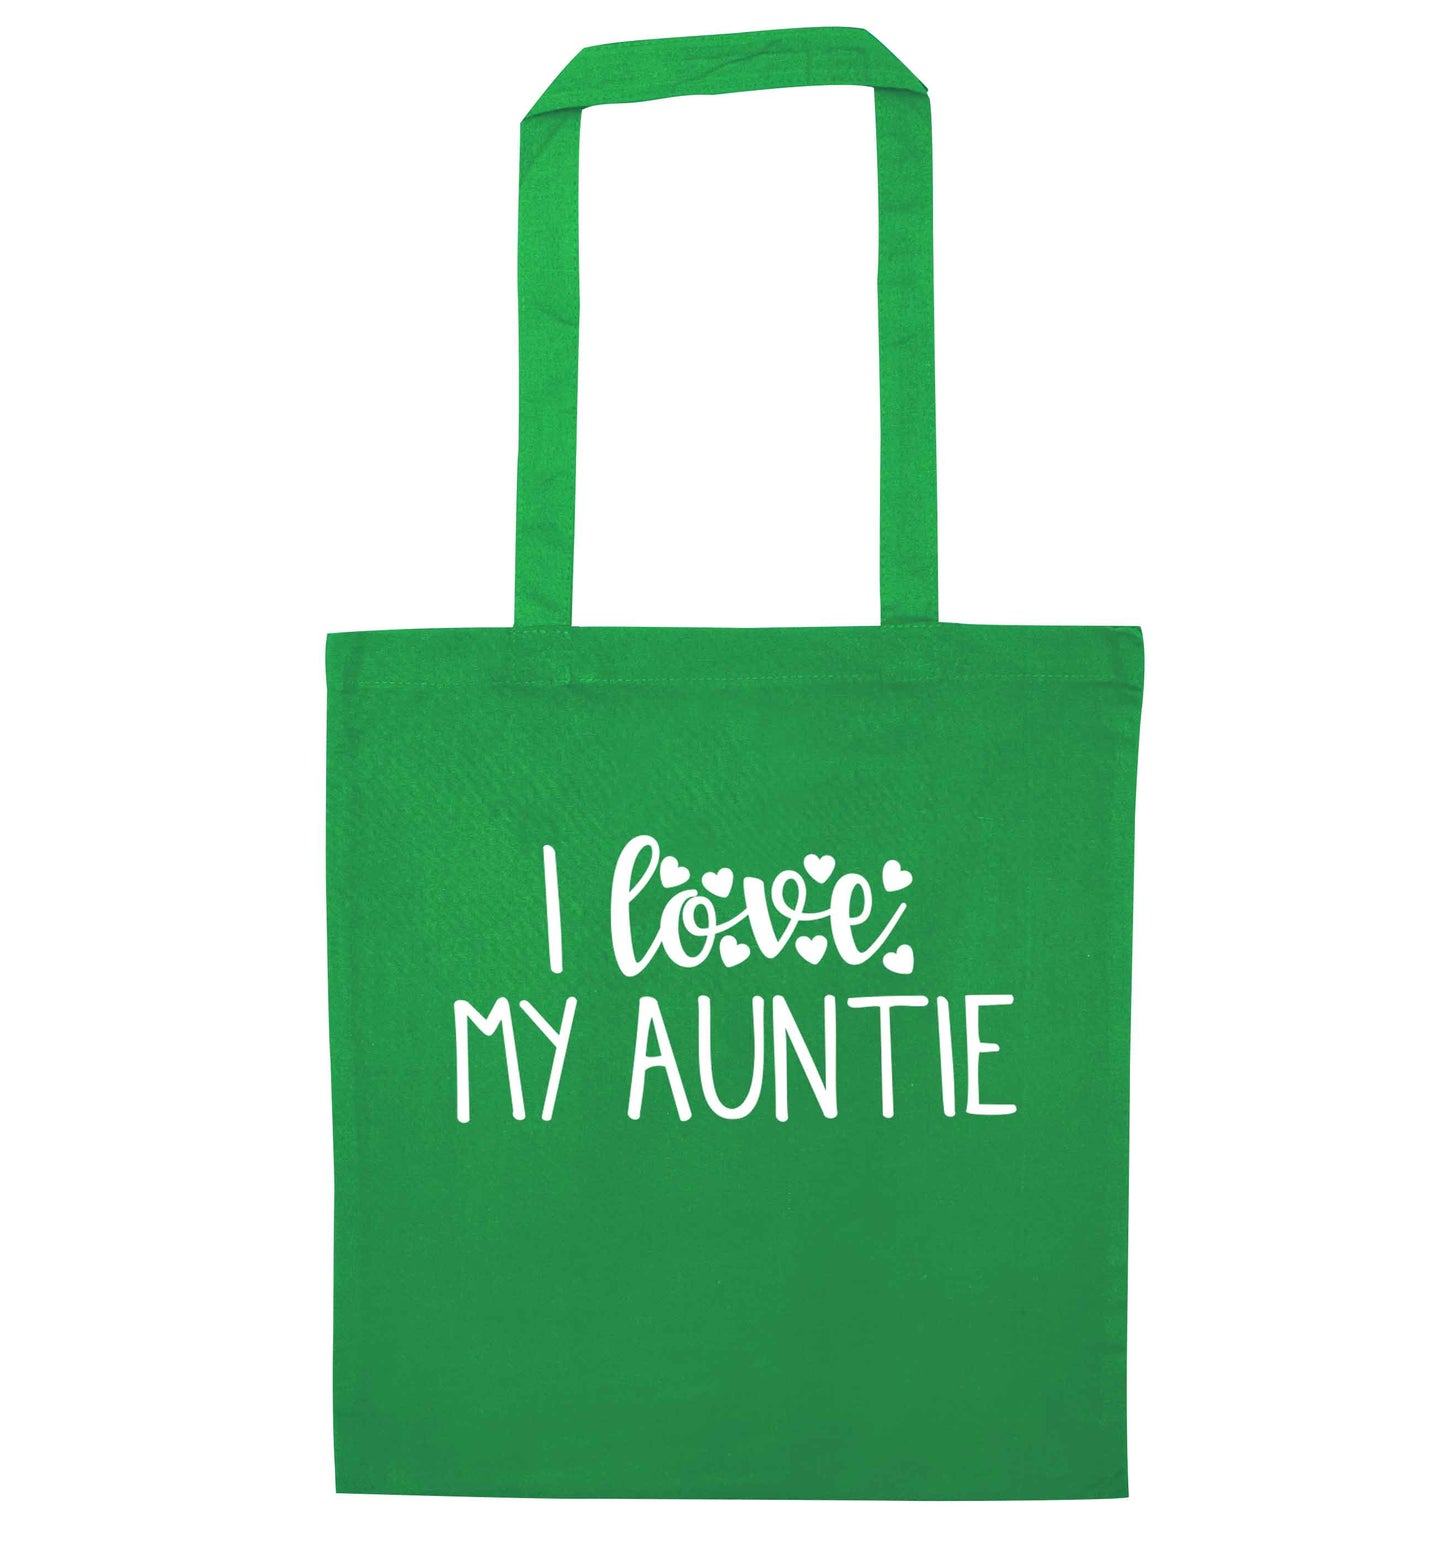 I love my auntie green tote bag